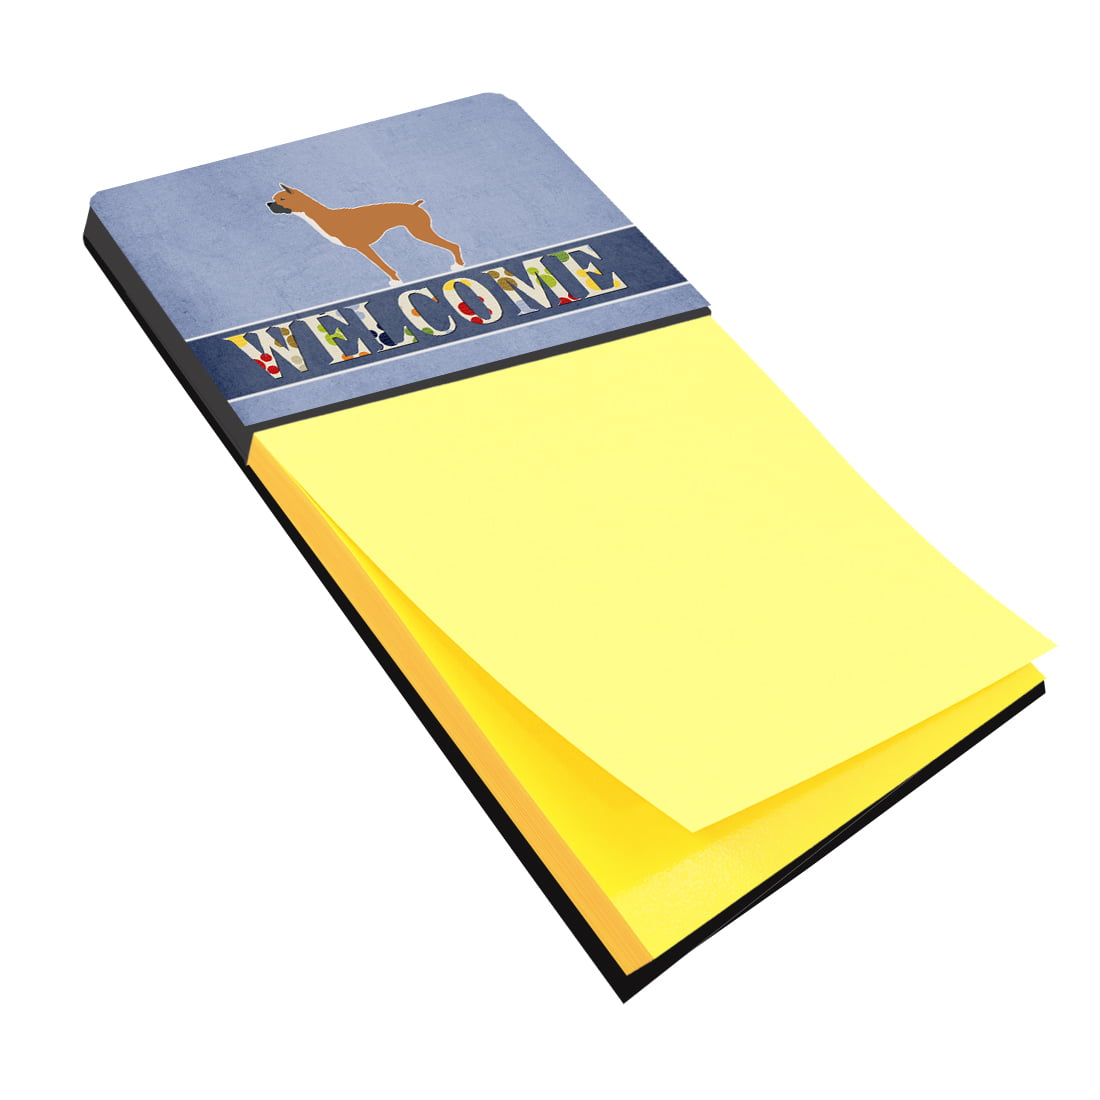 Bb5557sn Boxer Welcome Sticky Note Holder